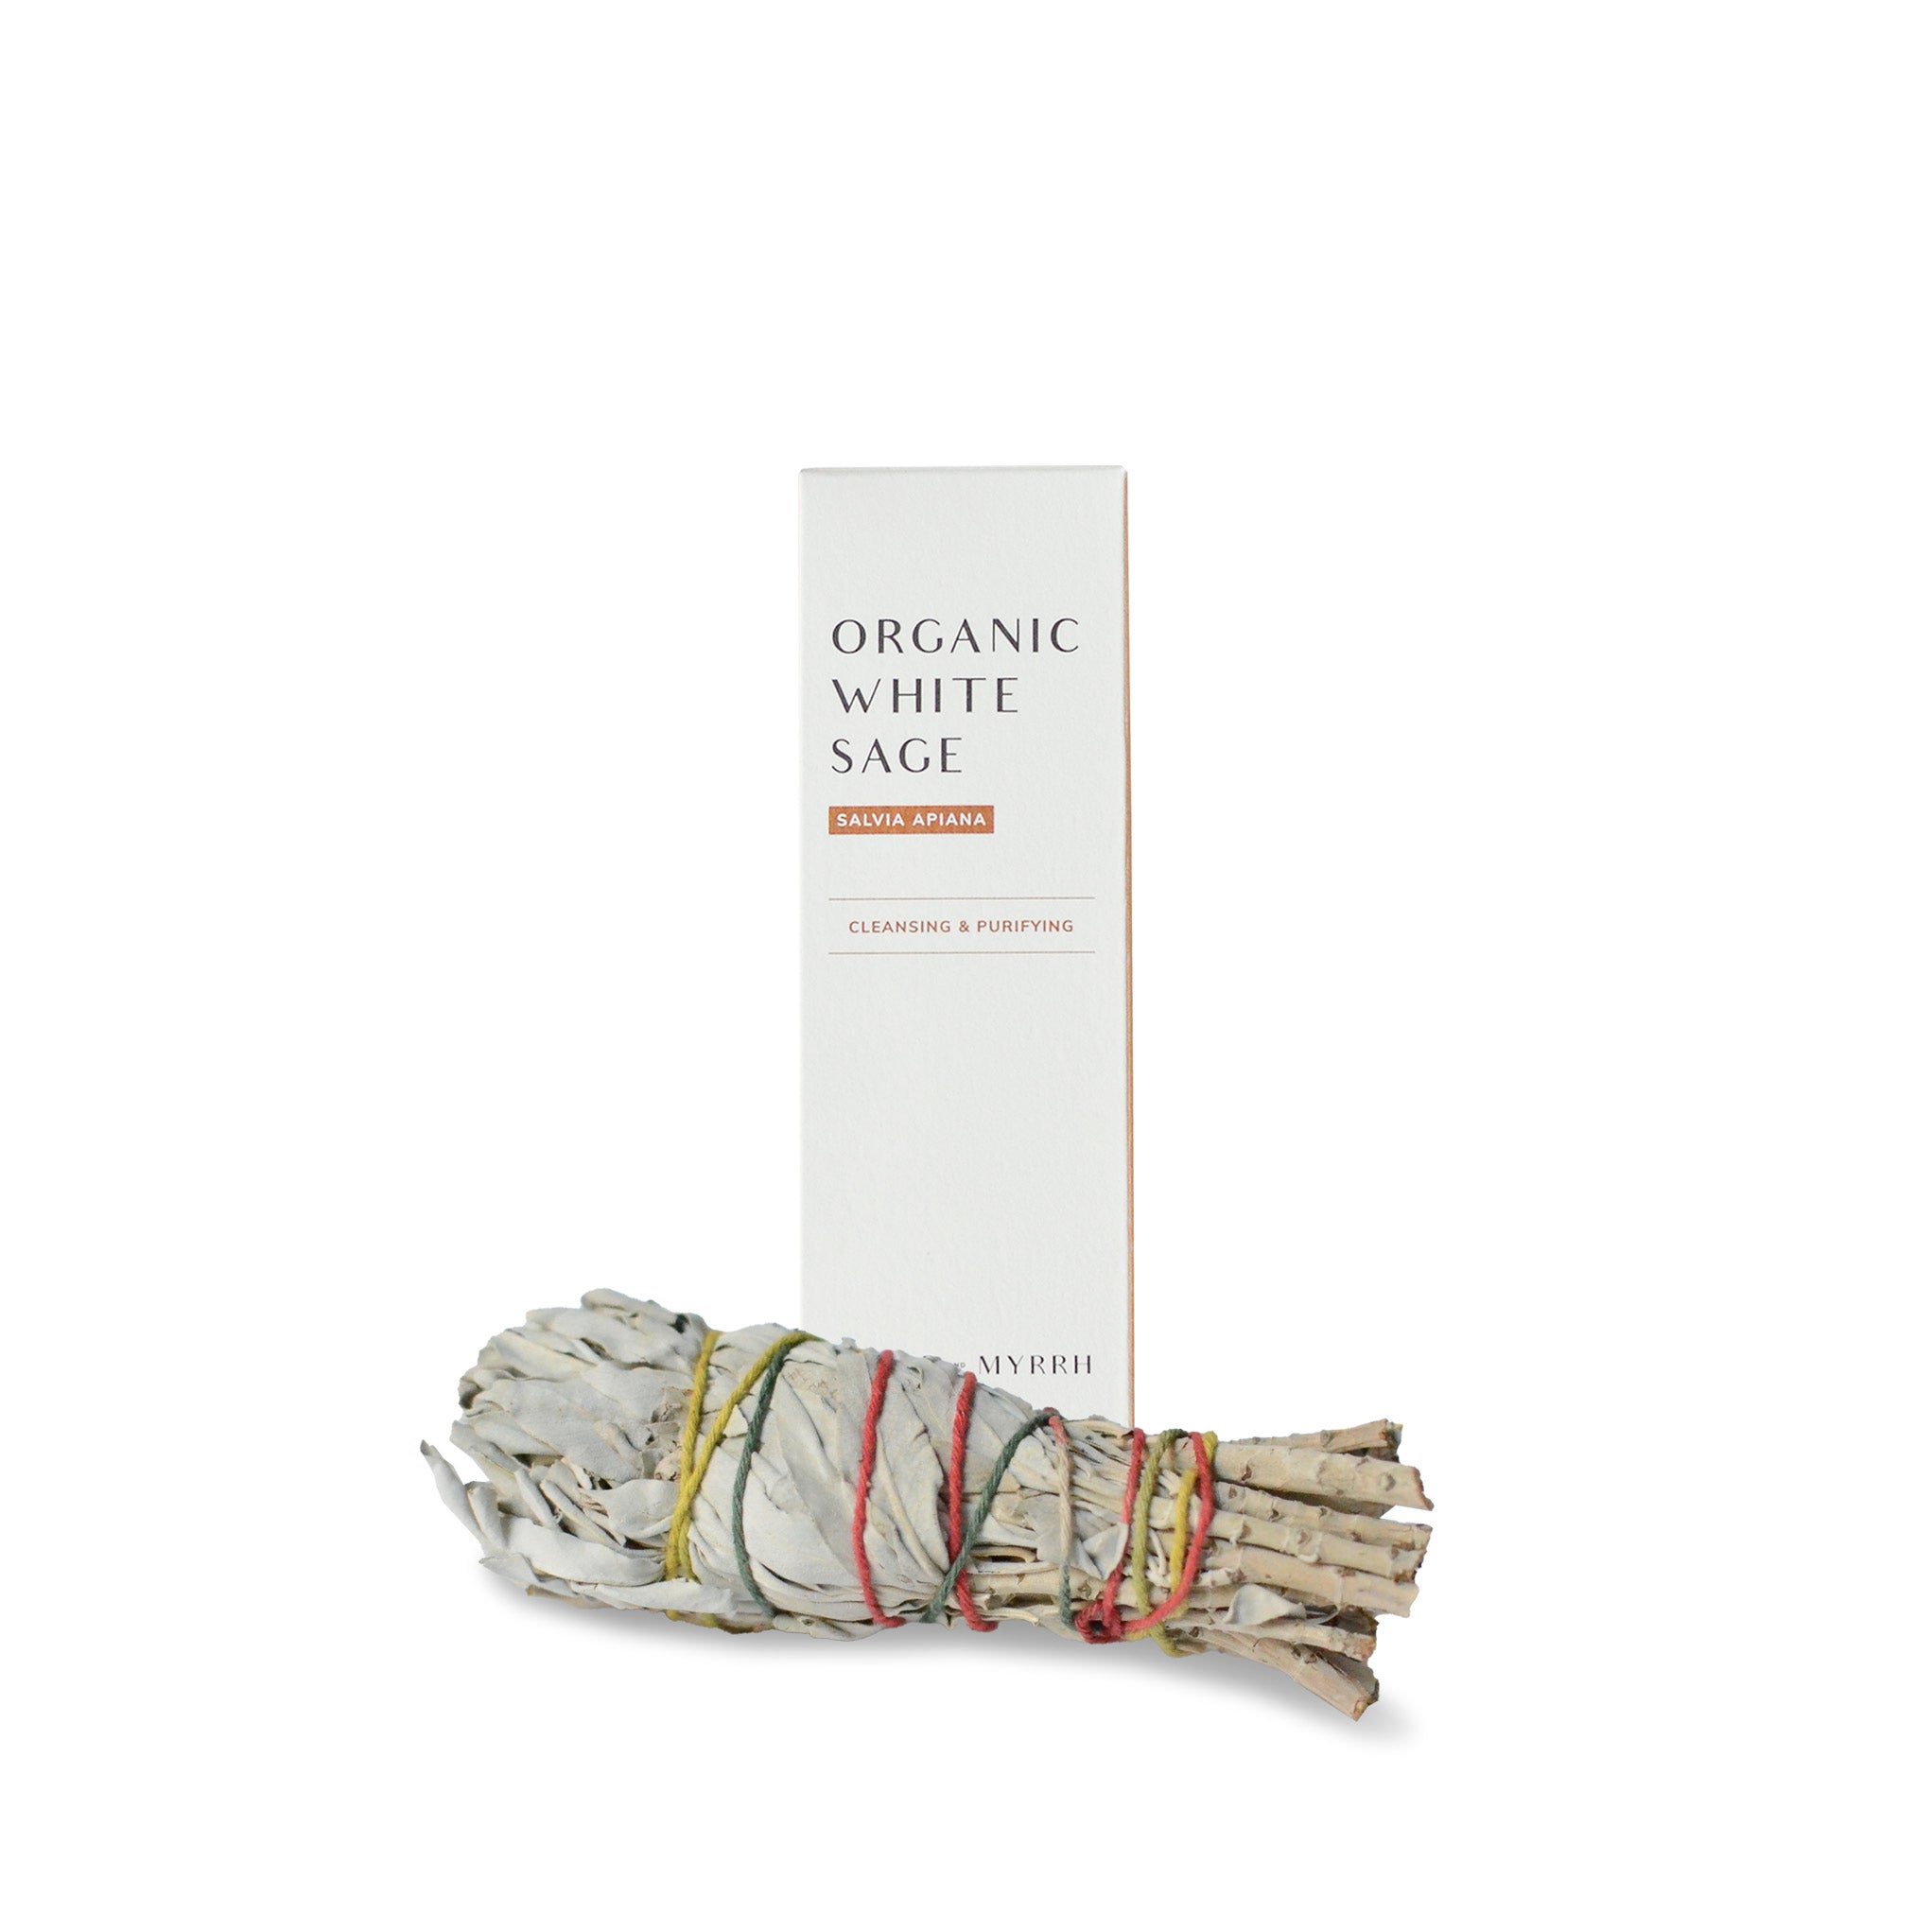 Medium white sage smudge stick and package at the back.